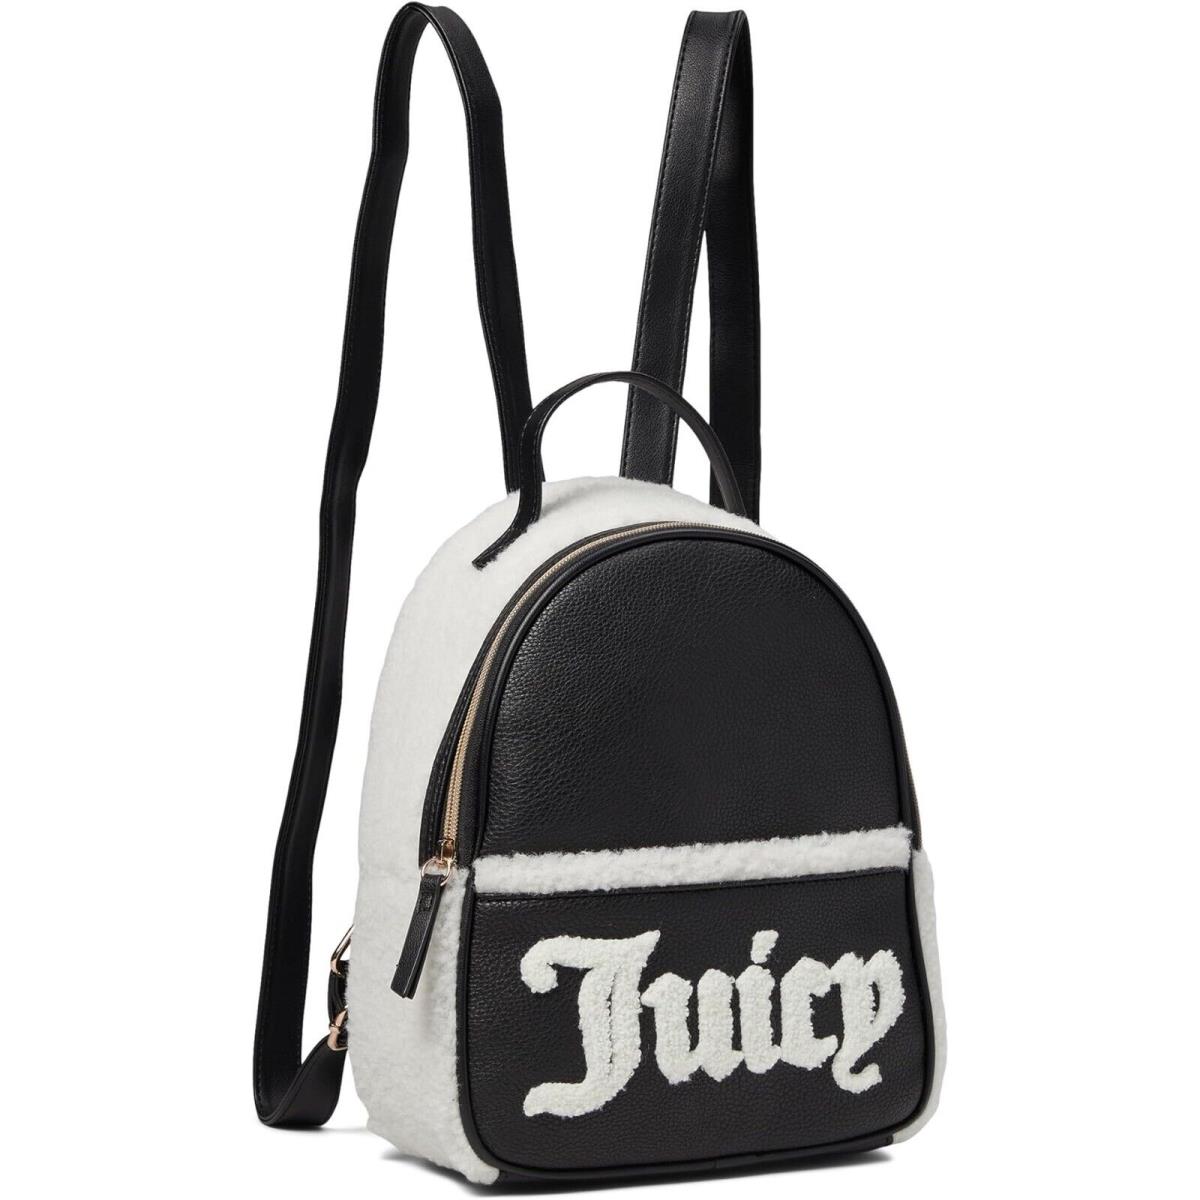 Juicy Couture Juicy Flashback Small Backpack Black Sherpa Crossbody Bag - Handle/Strap: Black, Hardware: Gold, Exterior: